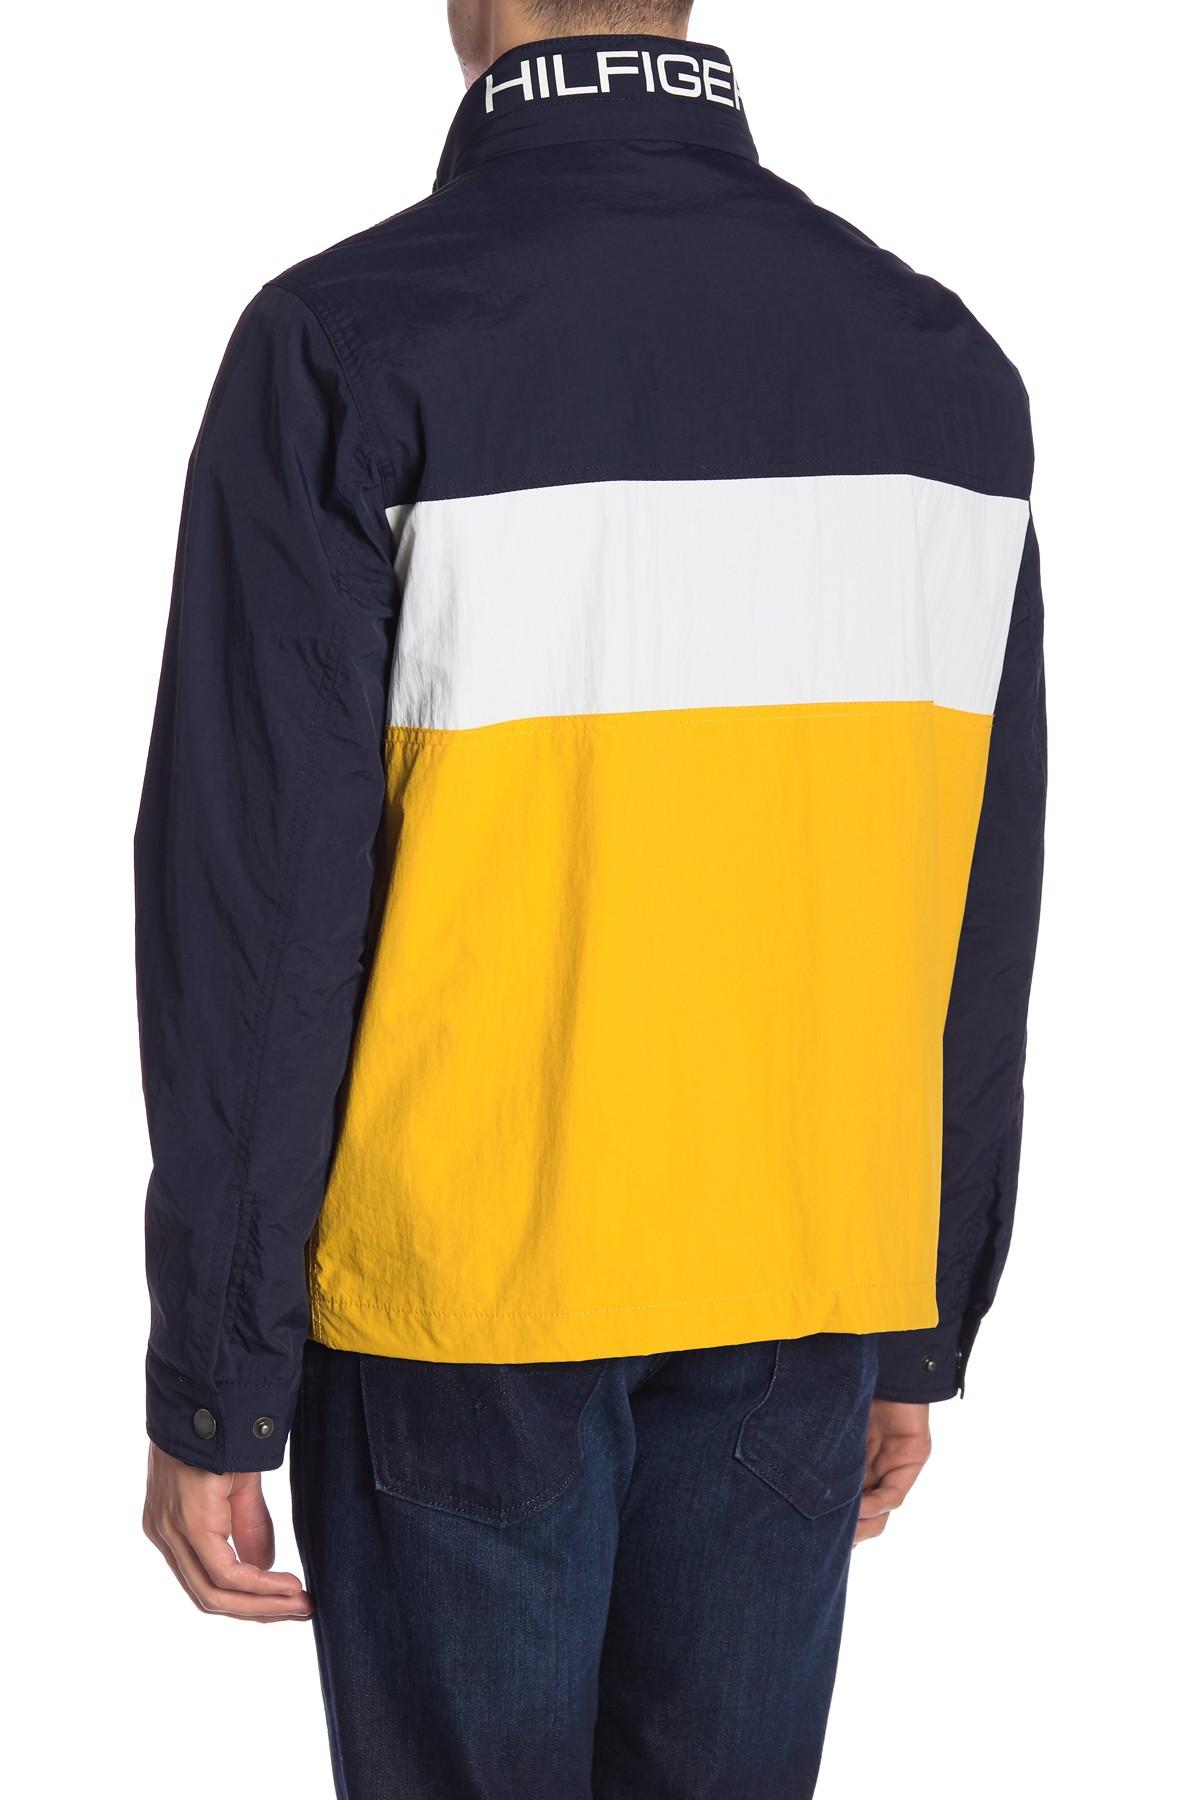 tommy hilfiger yellow red and blue jacket